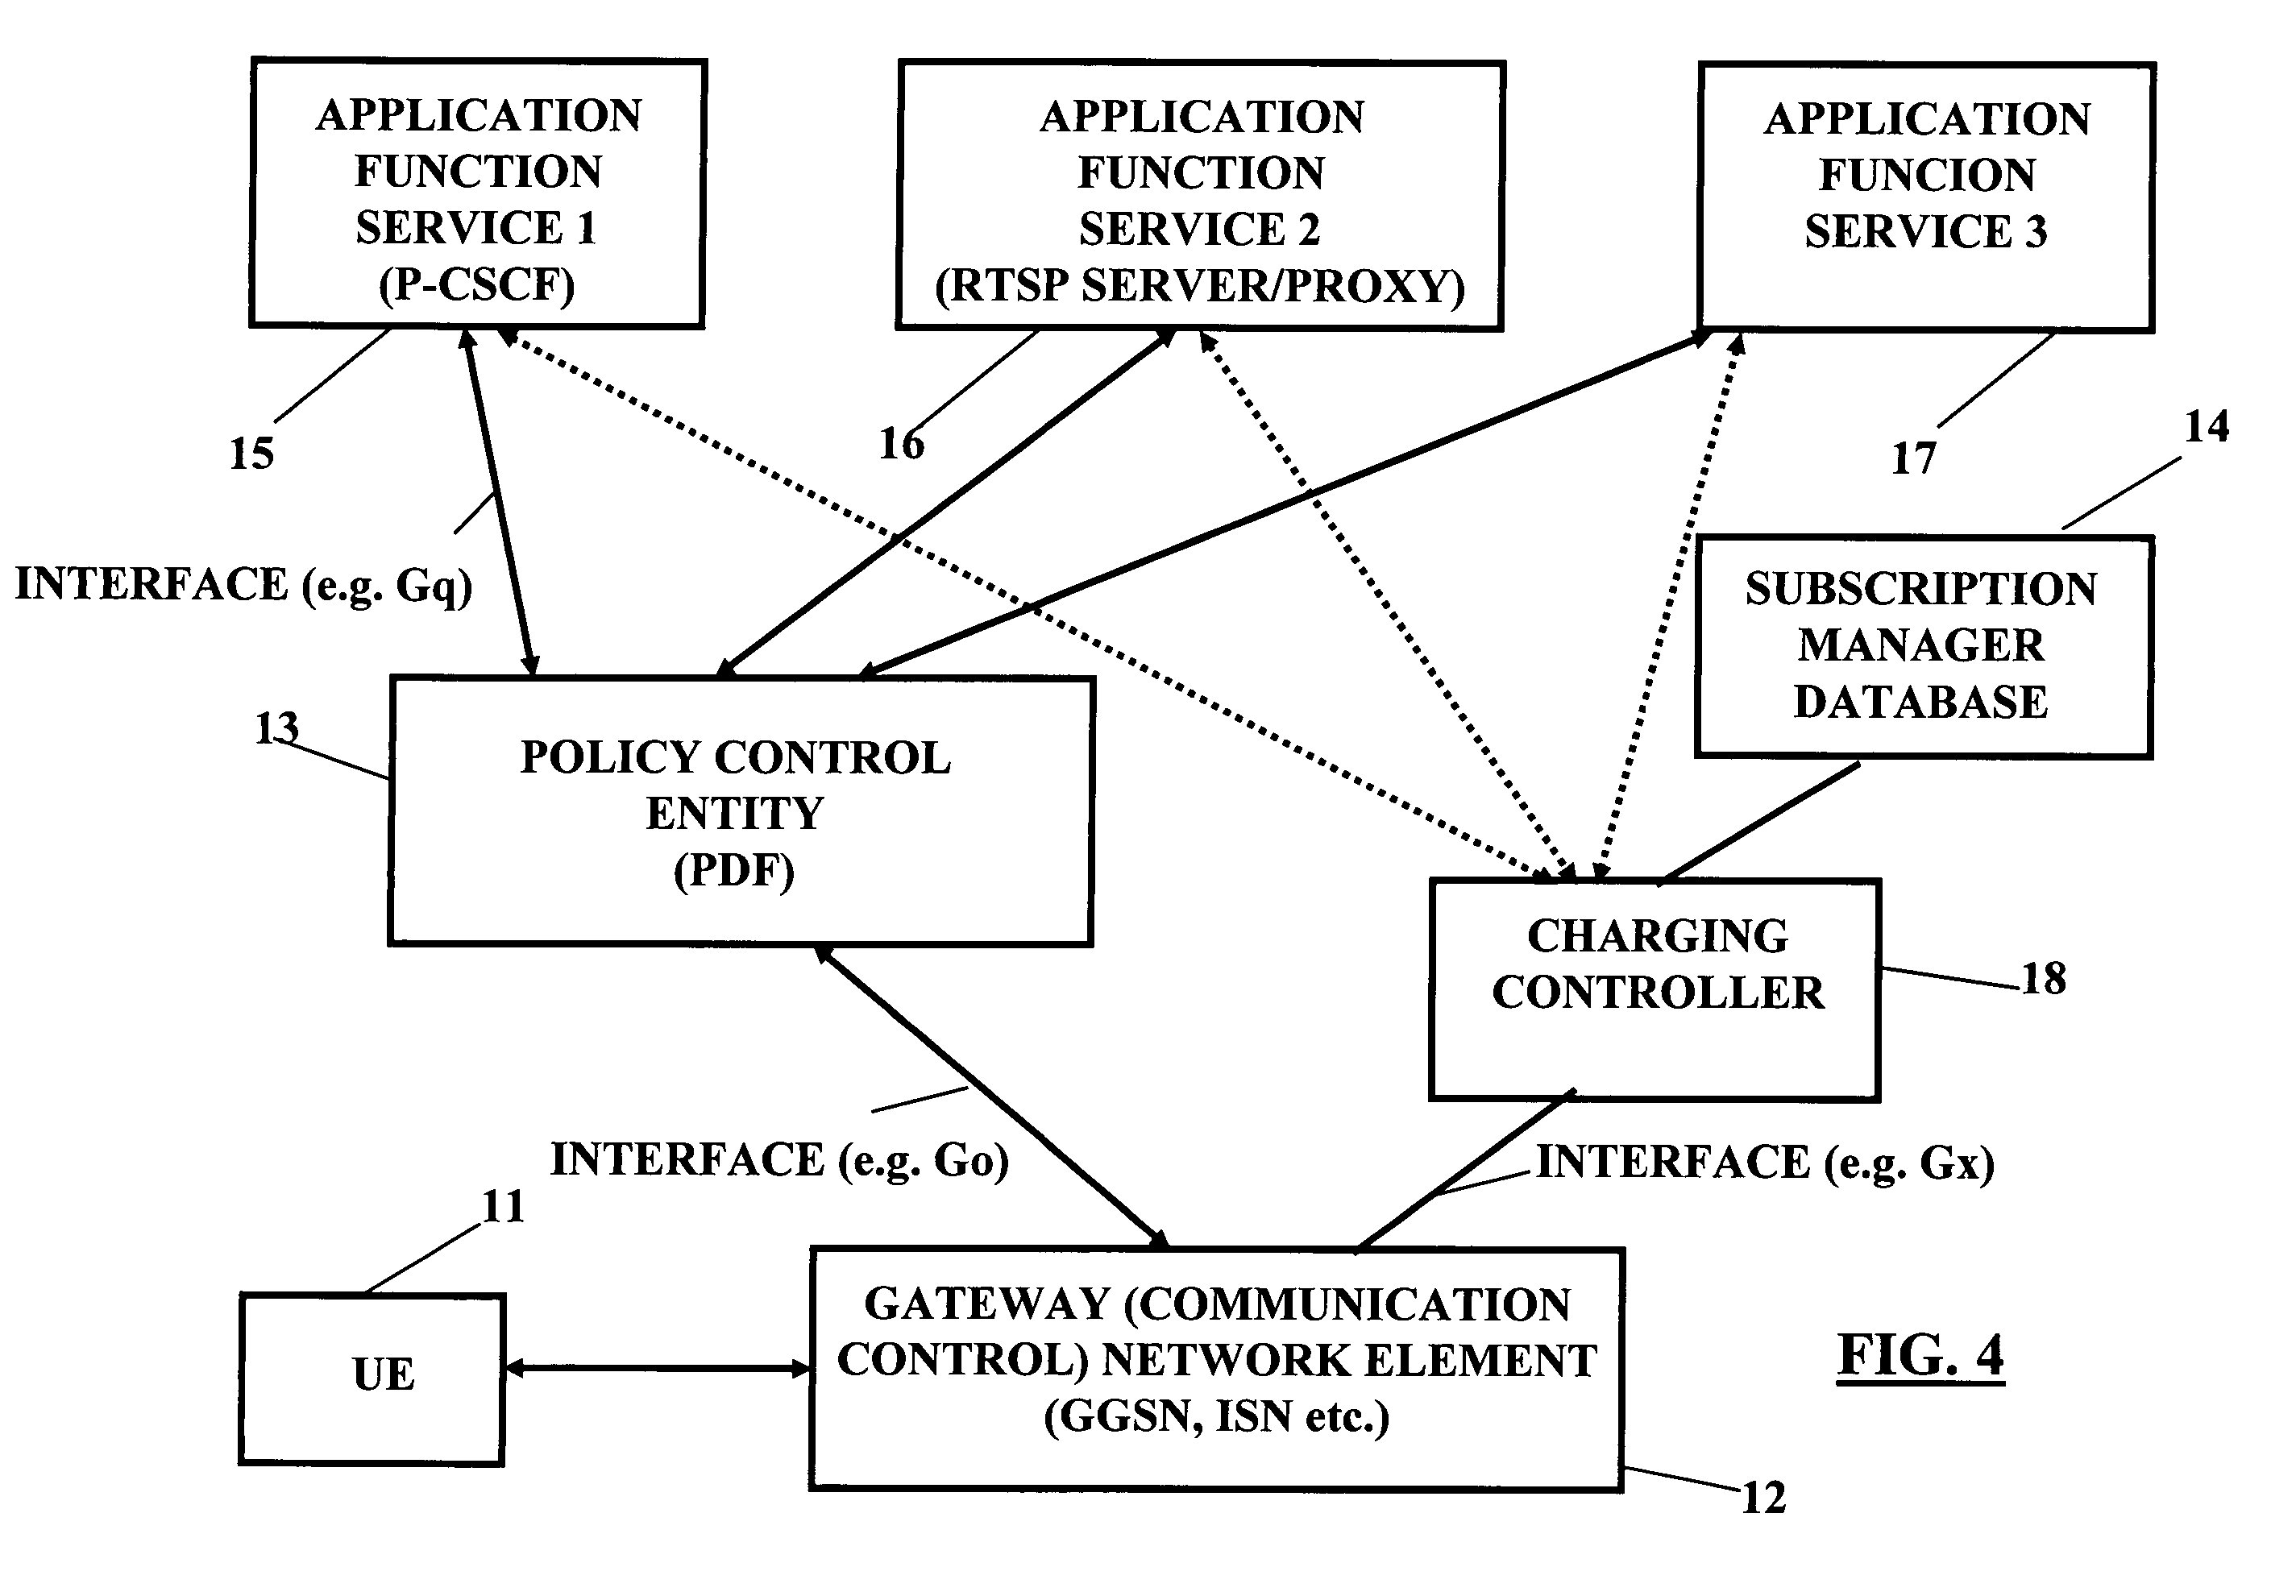 Indication of service flow termination by network control to policy decision function